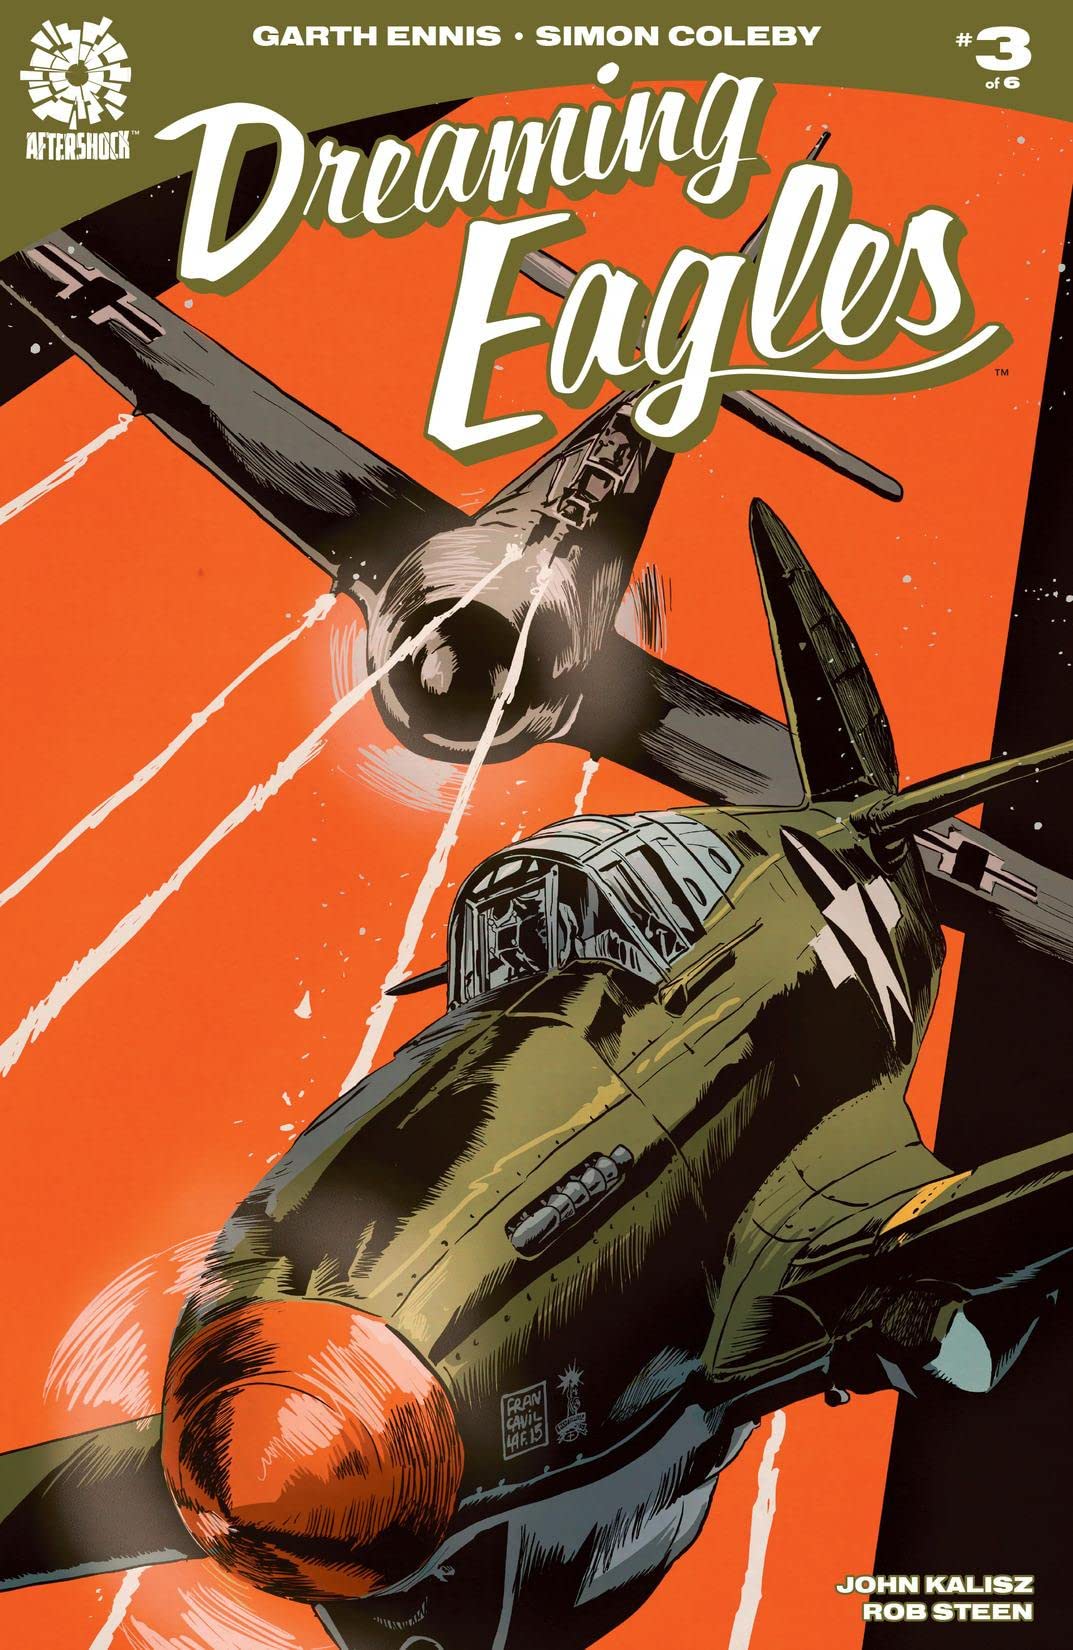 Dreaming Eagles #03